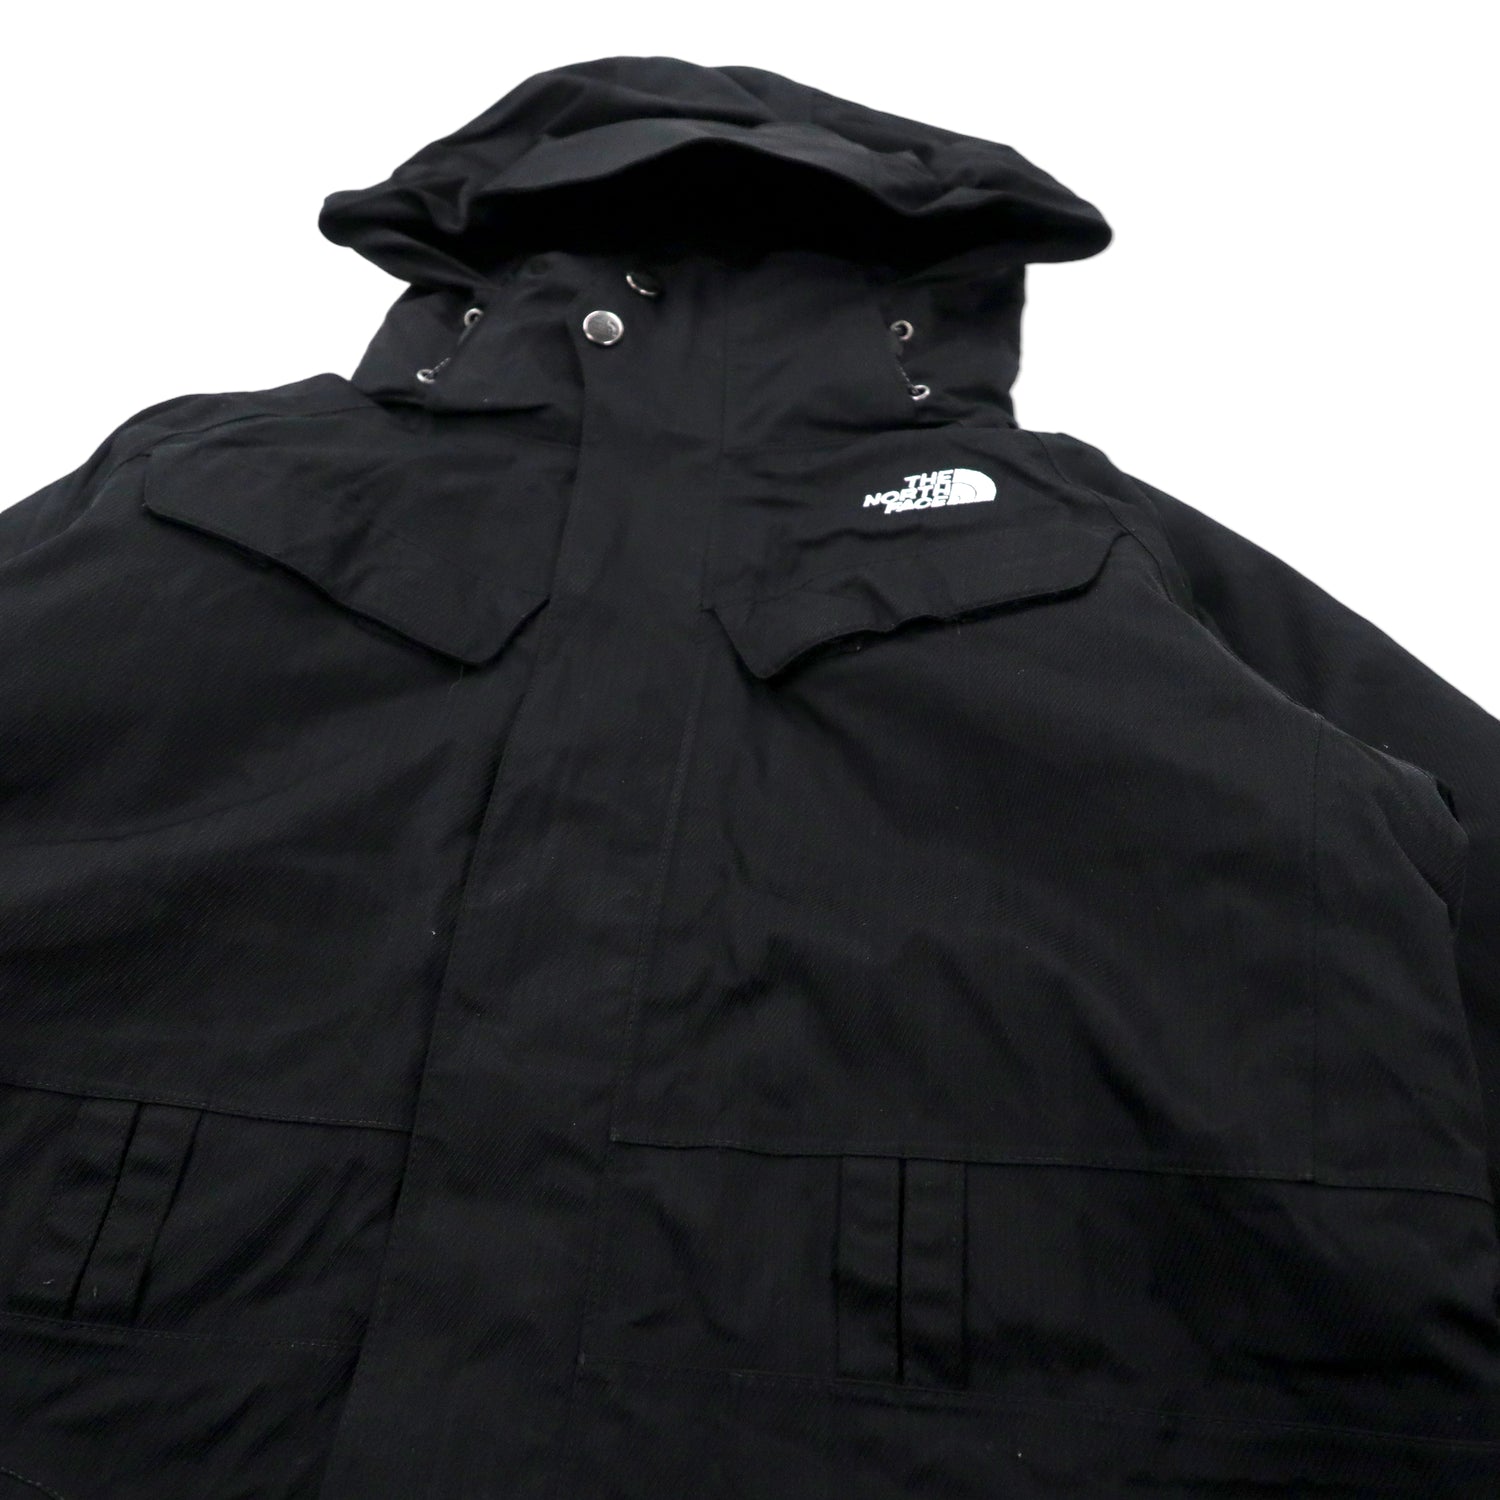 THE NORTH FACE Mountain HOODIE M Black Nylon 550 HYVENT Waterproof 